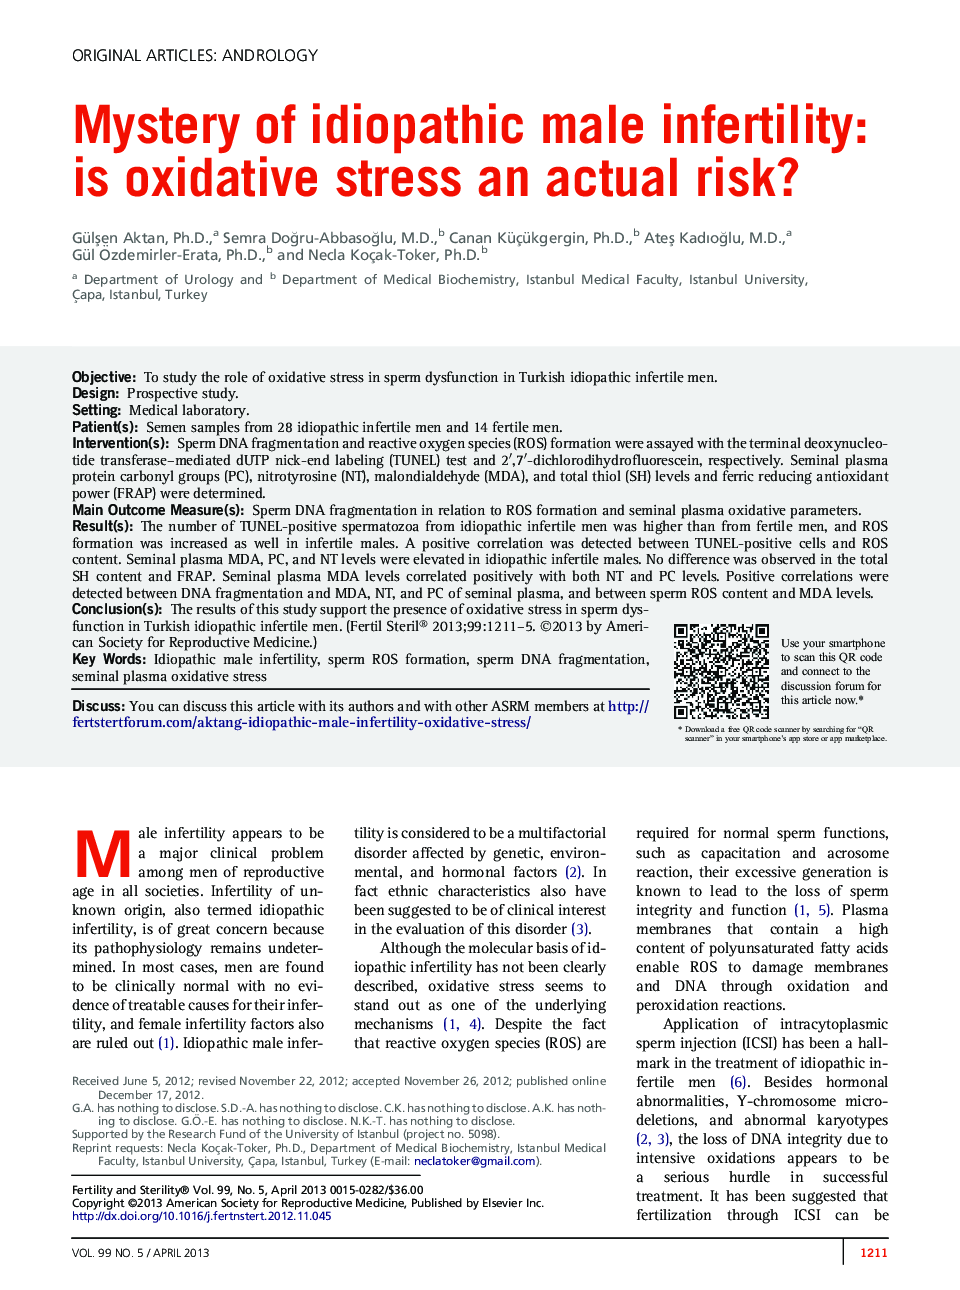 Mystery of idiopathic male infertility: is oxidative stress an actual risk? 